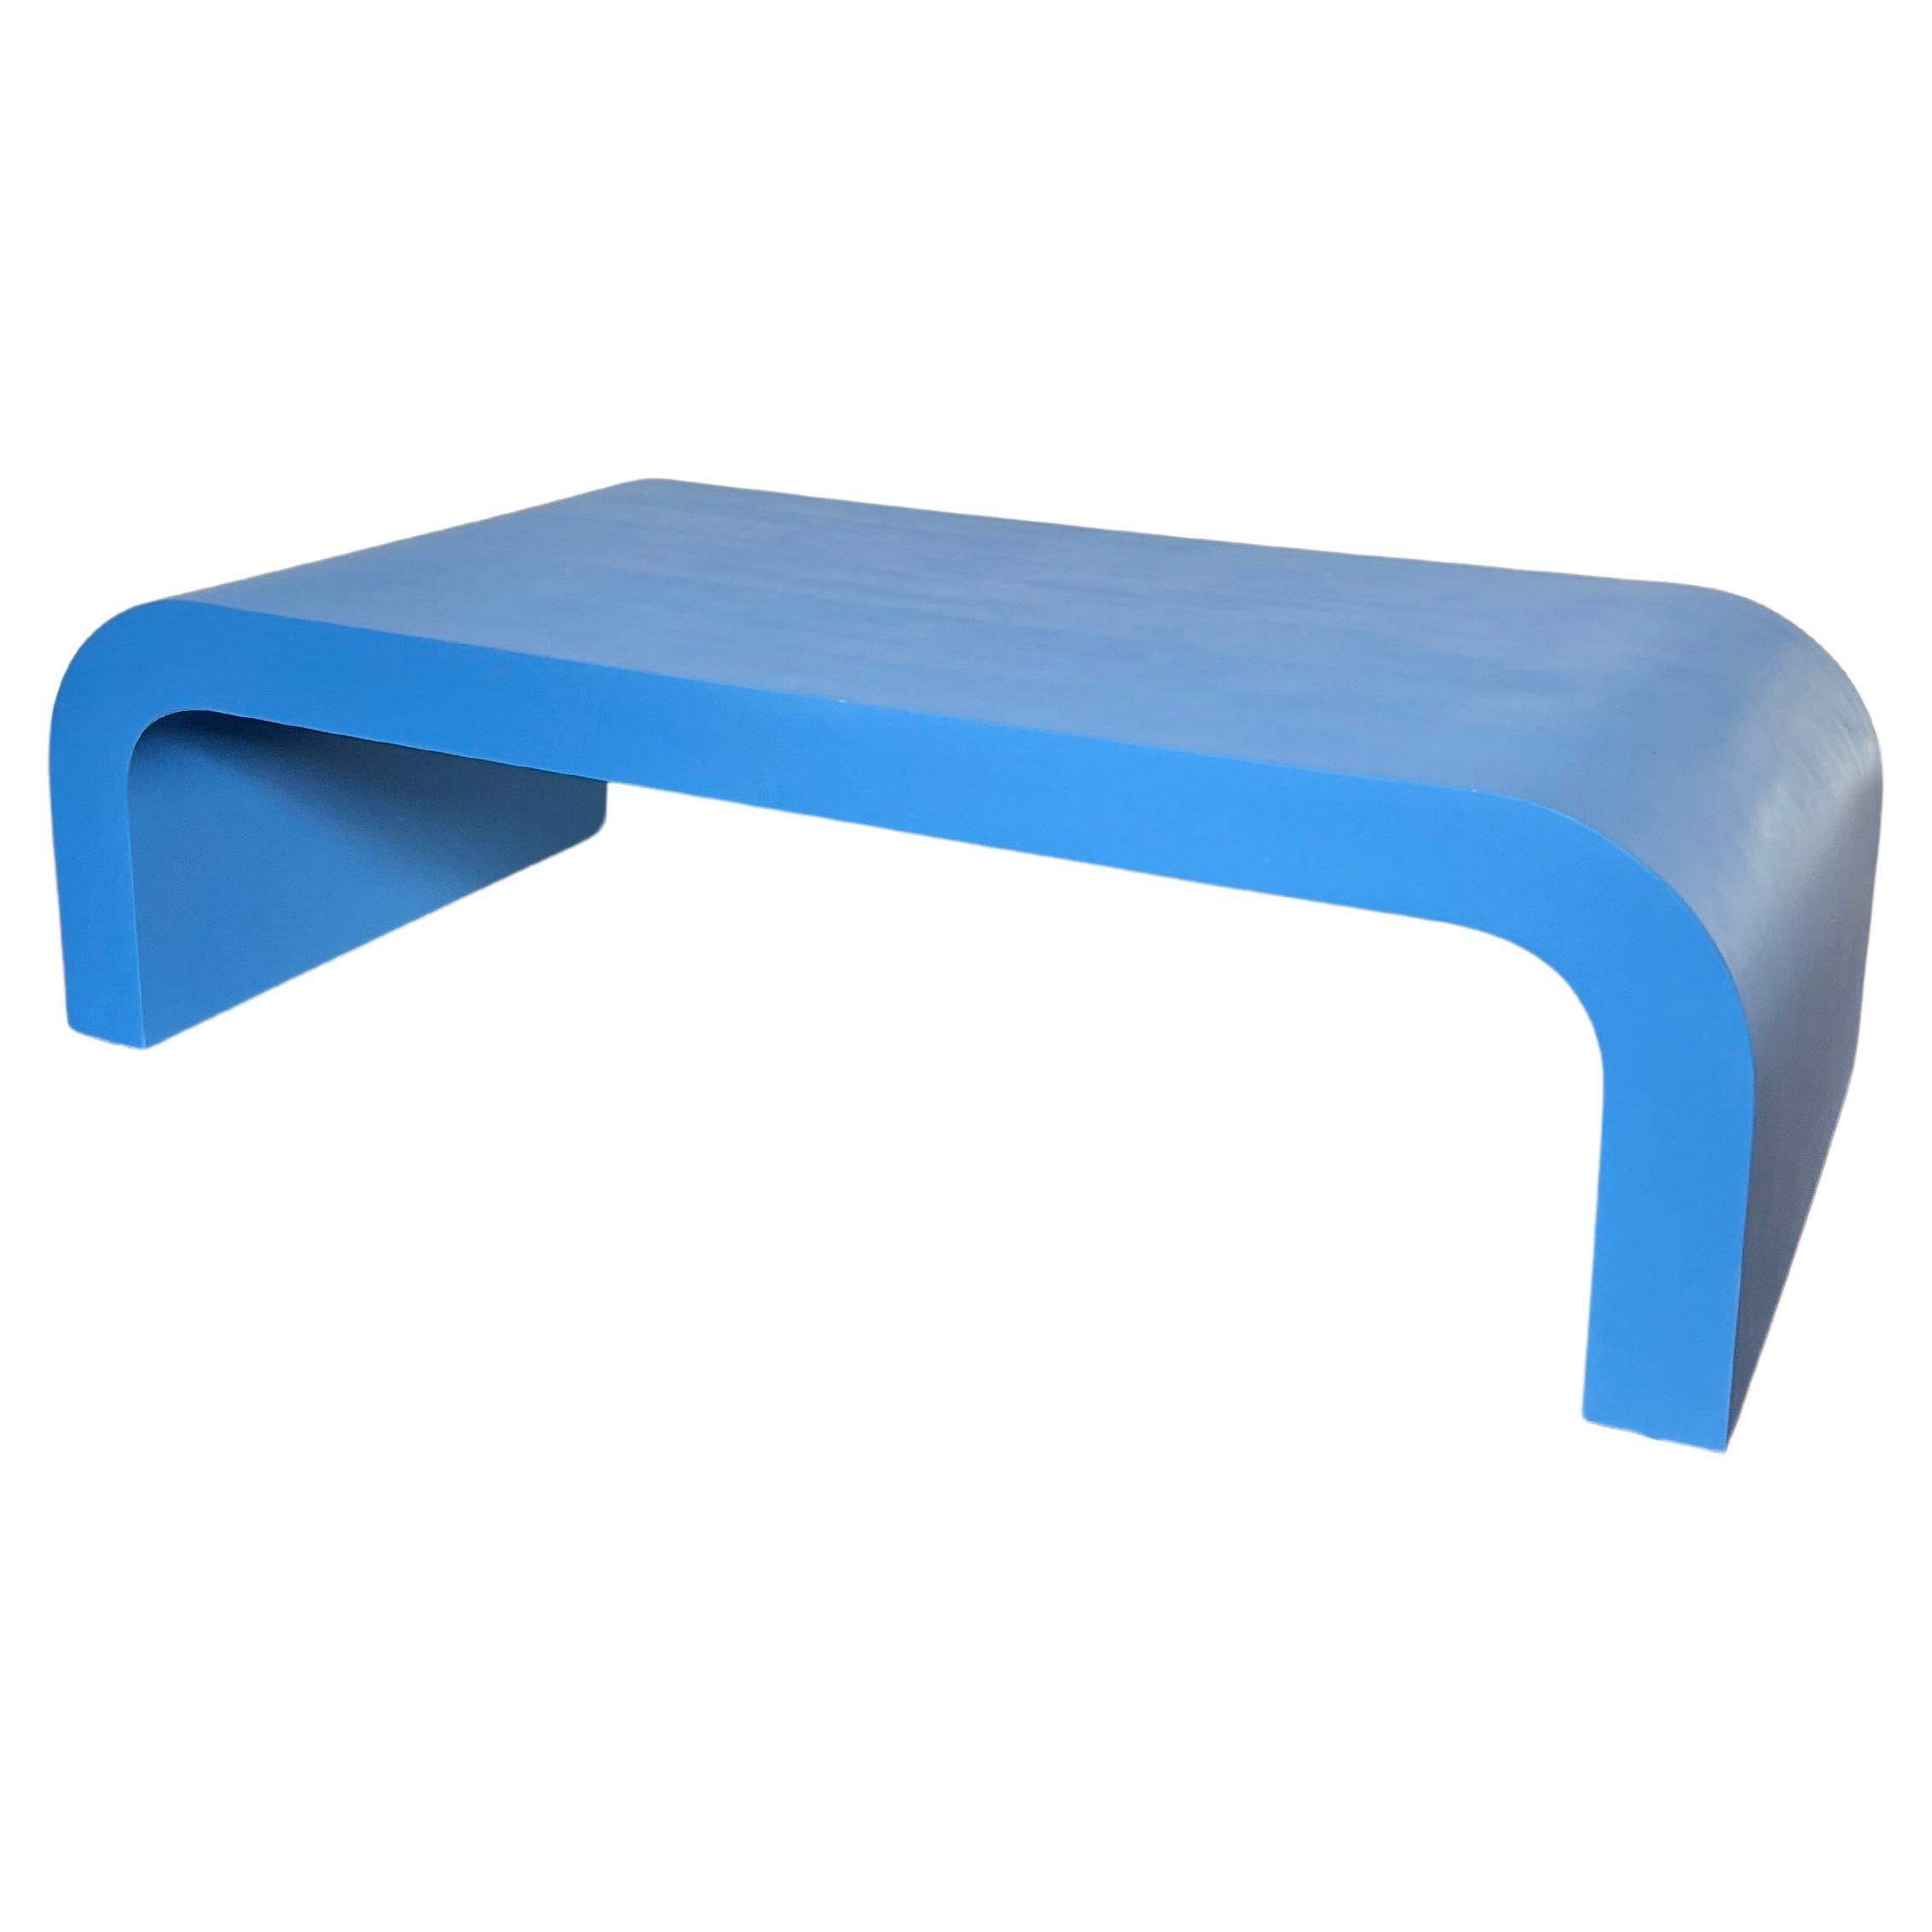 Vintage post modern waterfall coffee table in a gorgeous blue color